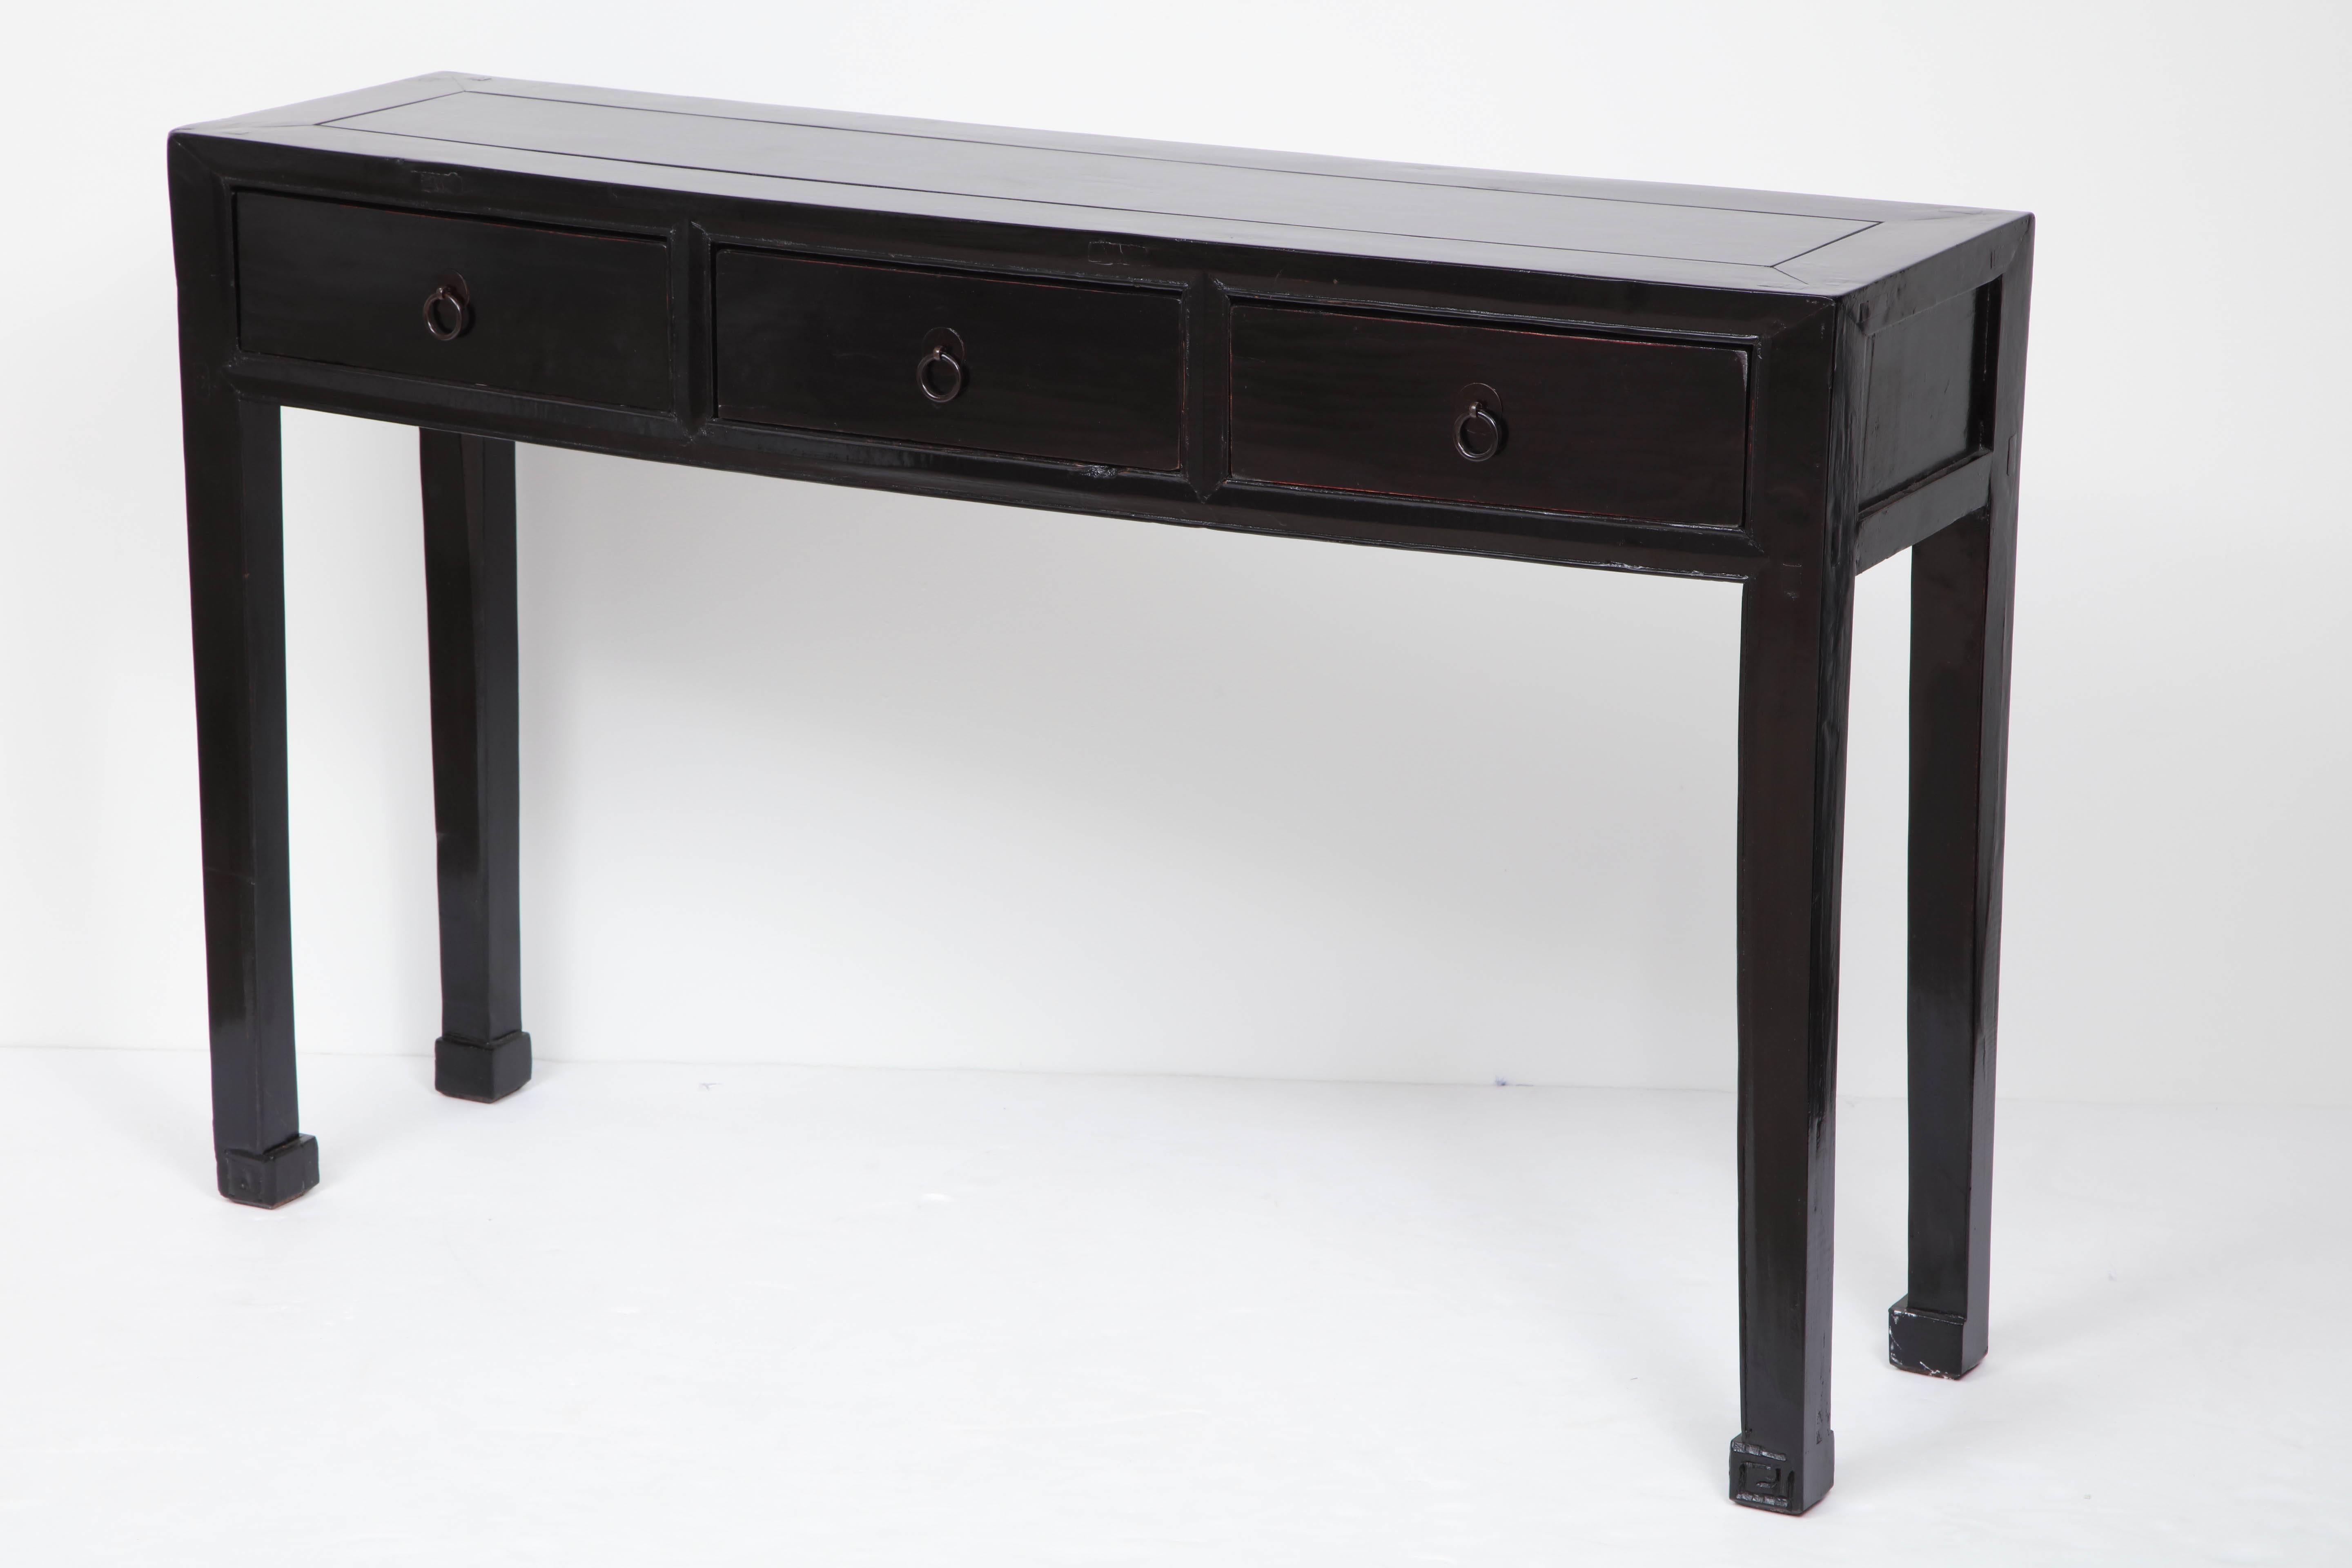 A Chinese black lacquered console, circa 1920s, with a rectangular paneled top above three frieze drawers raised on square legs with key carved feet.